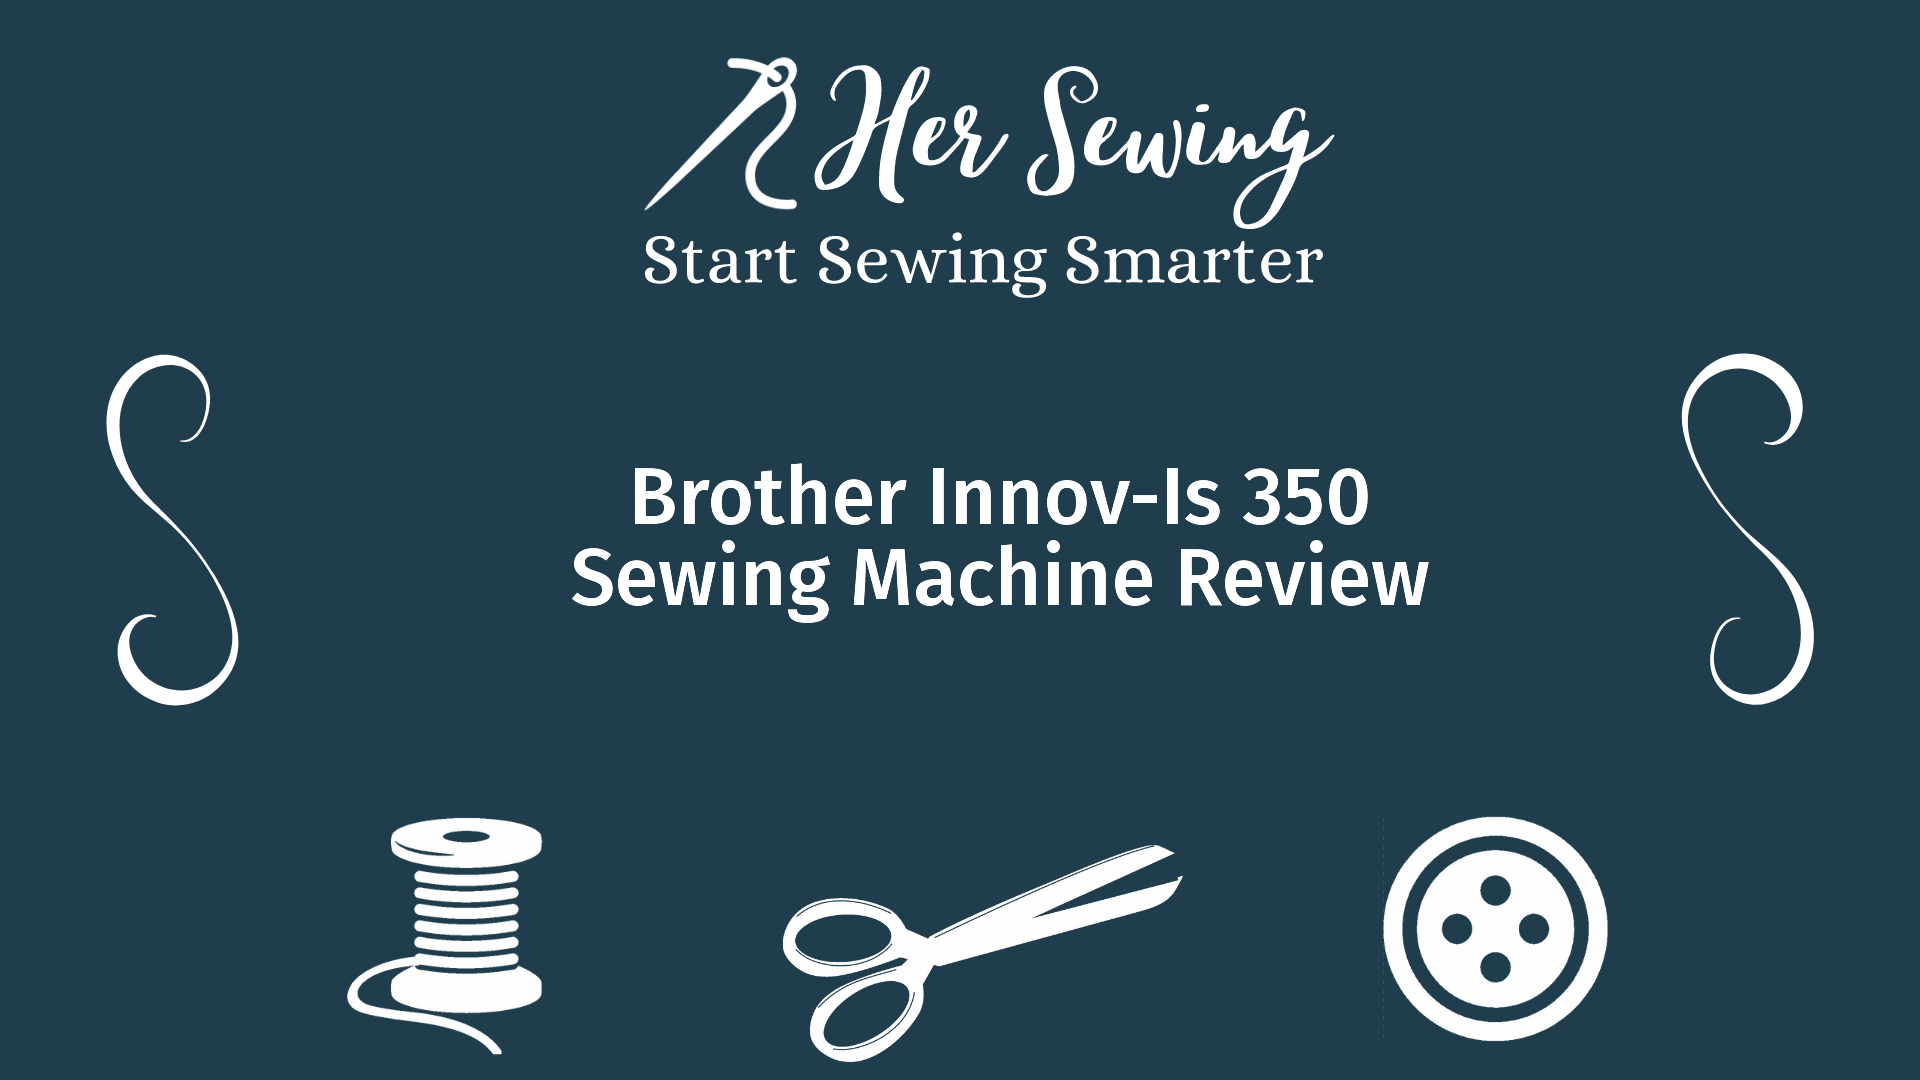 Brother Innov-Is 350 Sewing Machine Review